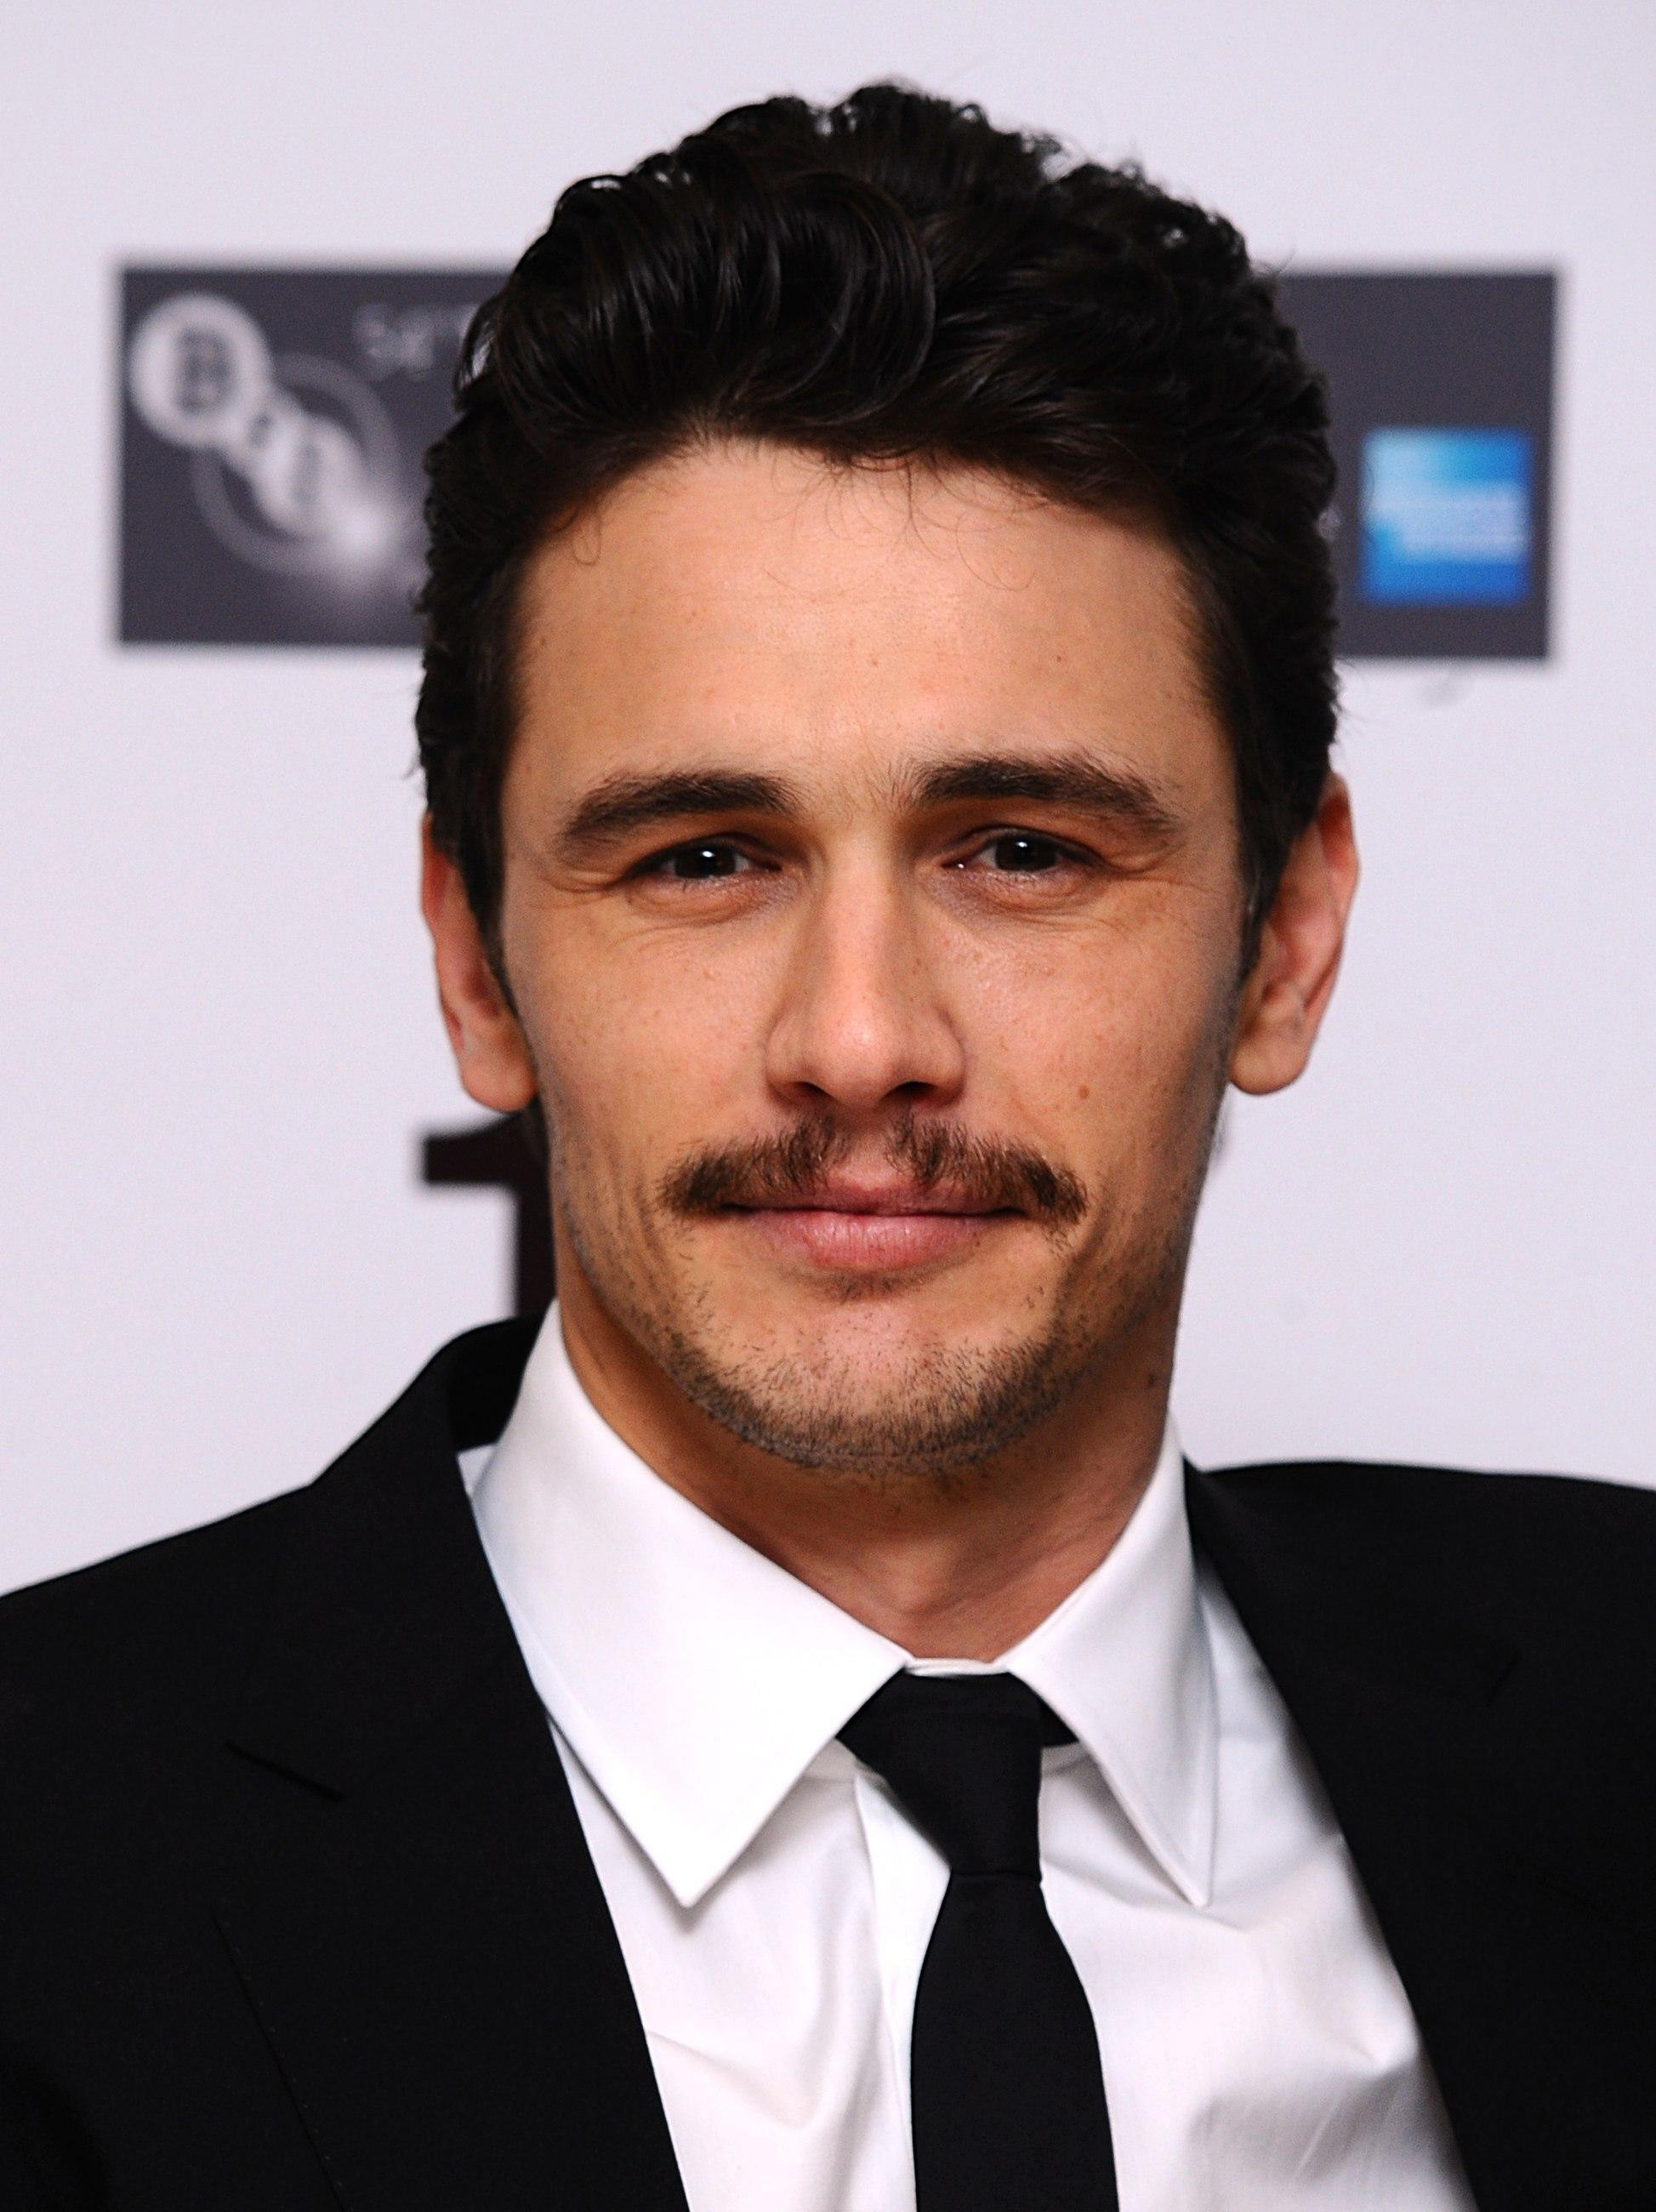 Pictures of James Franco, Picture #68023 - Pictures Of Celebrities